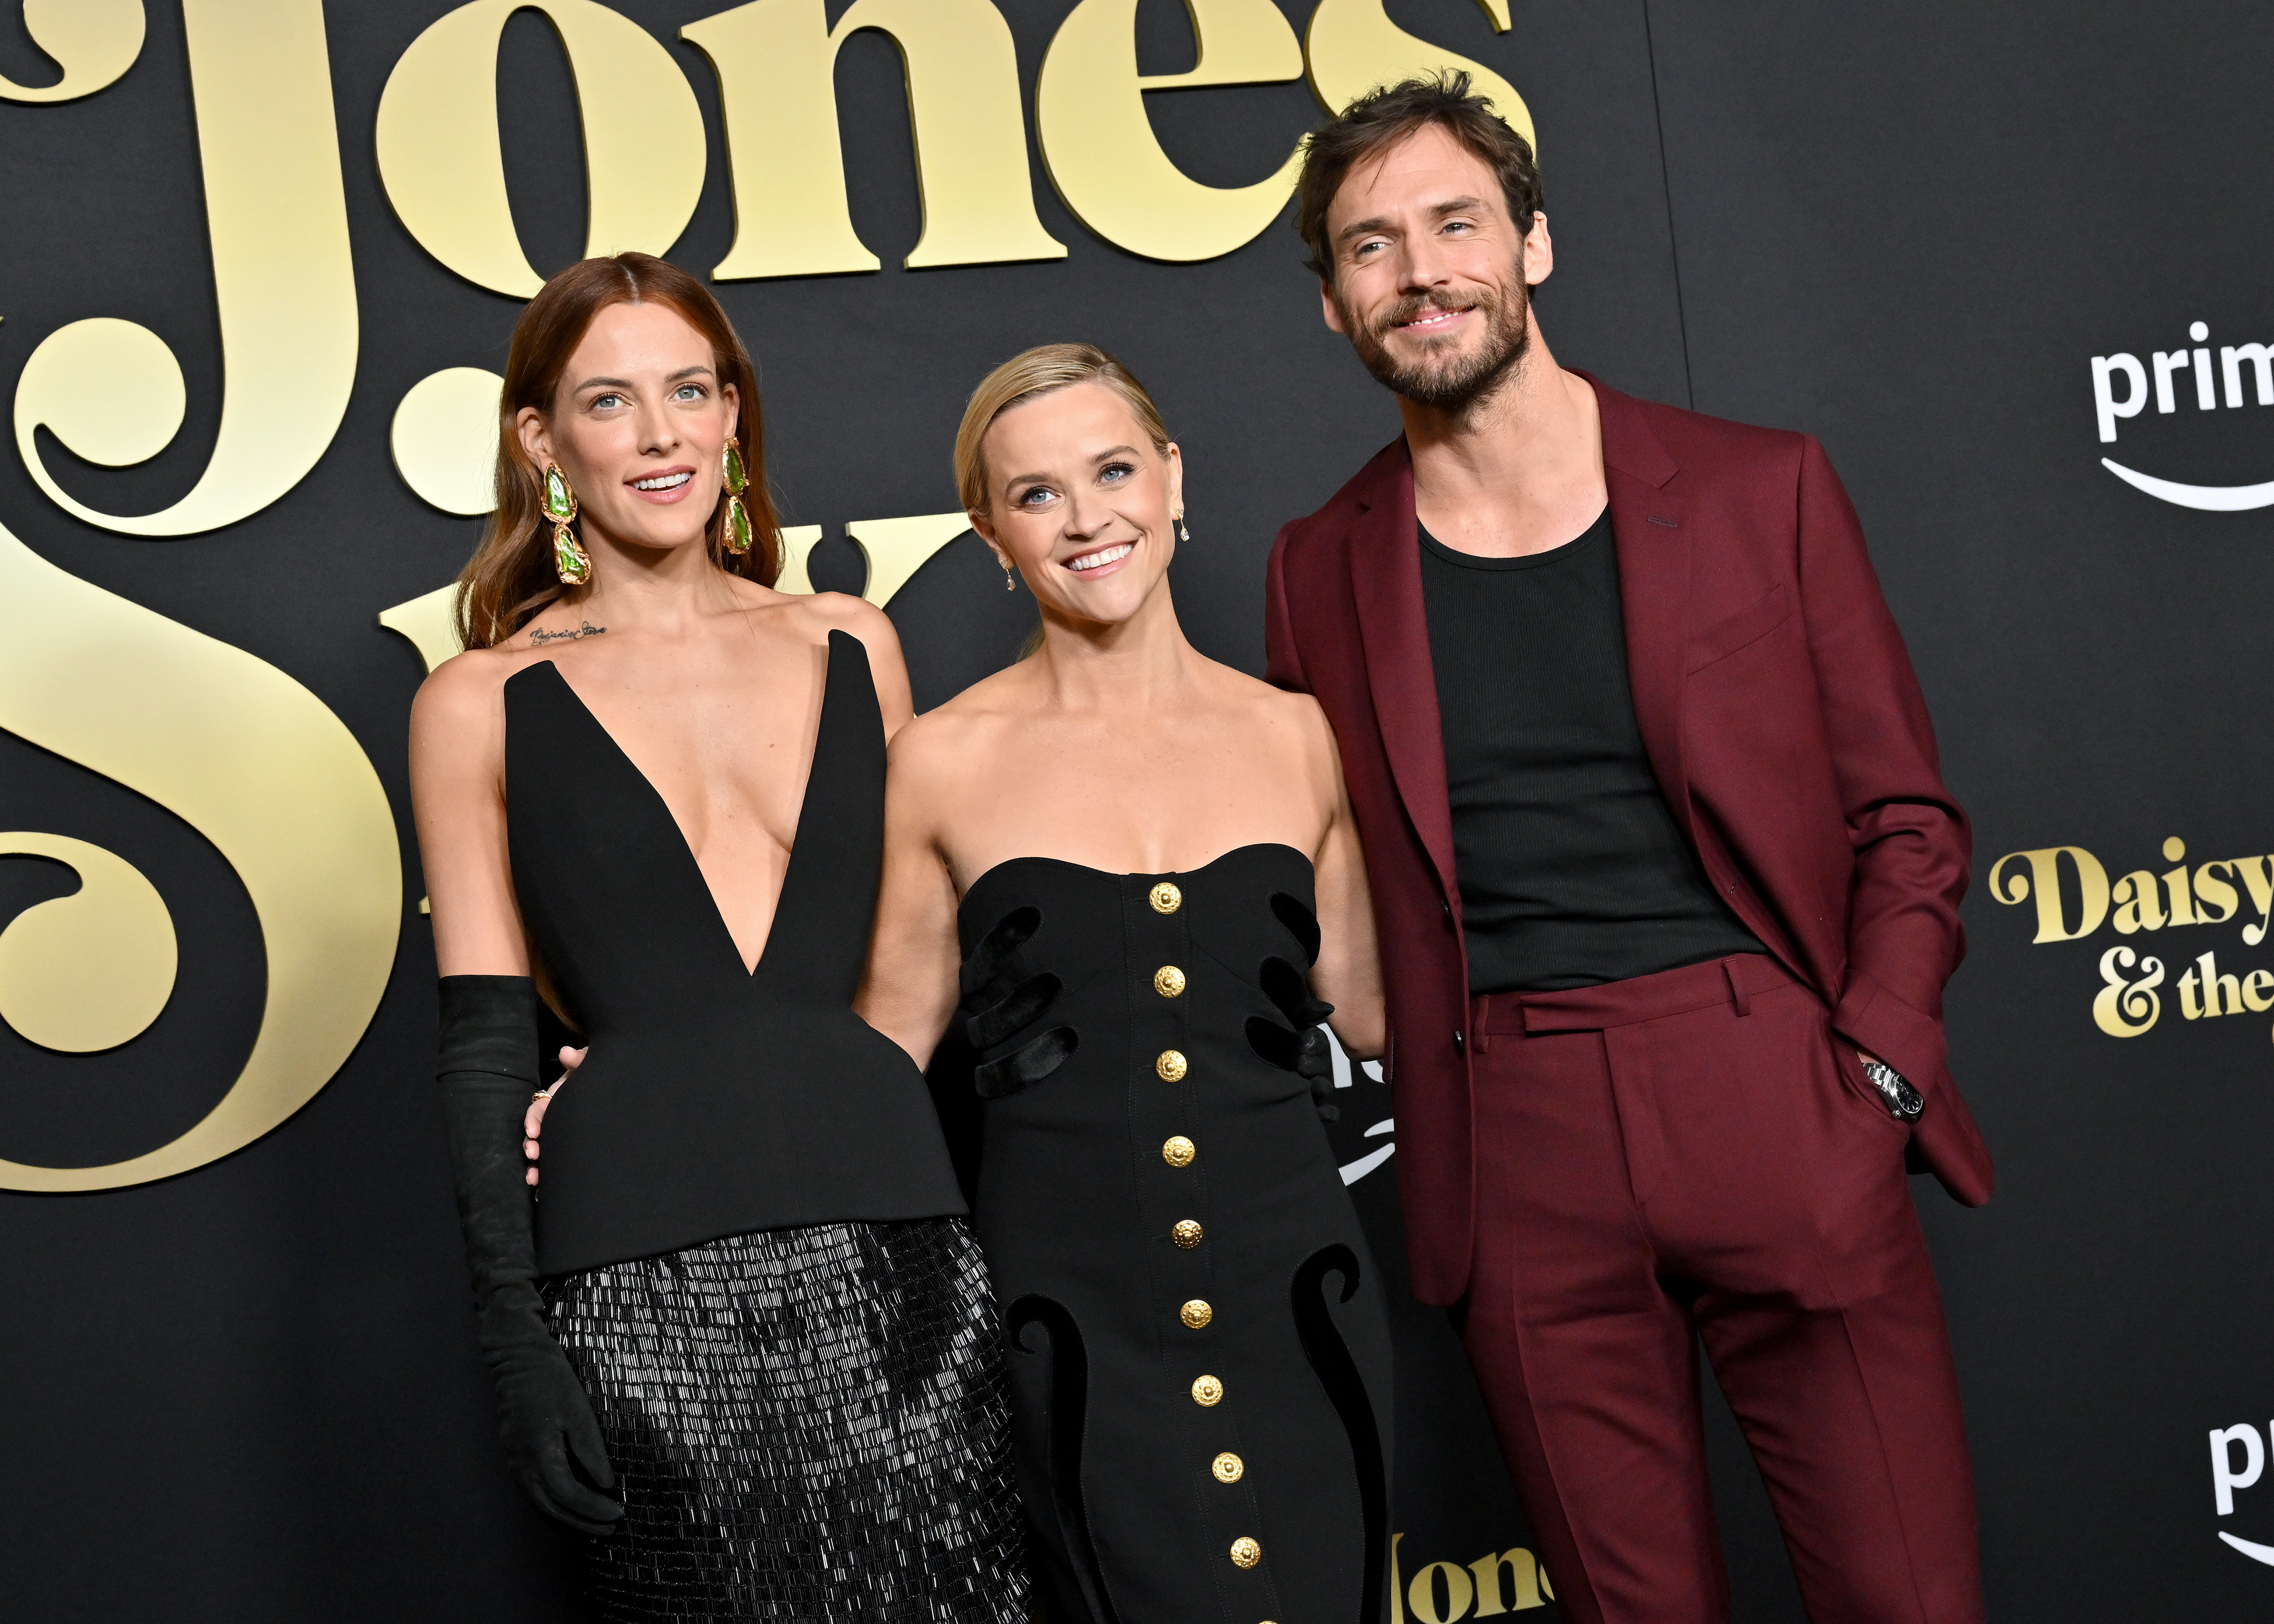 Sam Claflin with Riley Keough, and Reese Witherspoon at the Los Angeles Premiere of Prime Video's "Daisy Jones & The Six" in February 2023, in Hollywood, California. | Source: Getty Images.